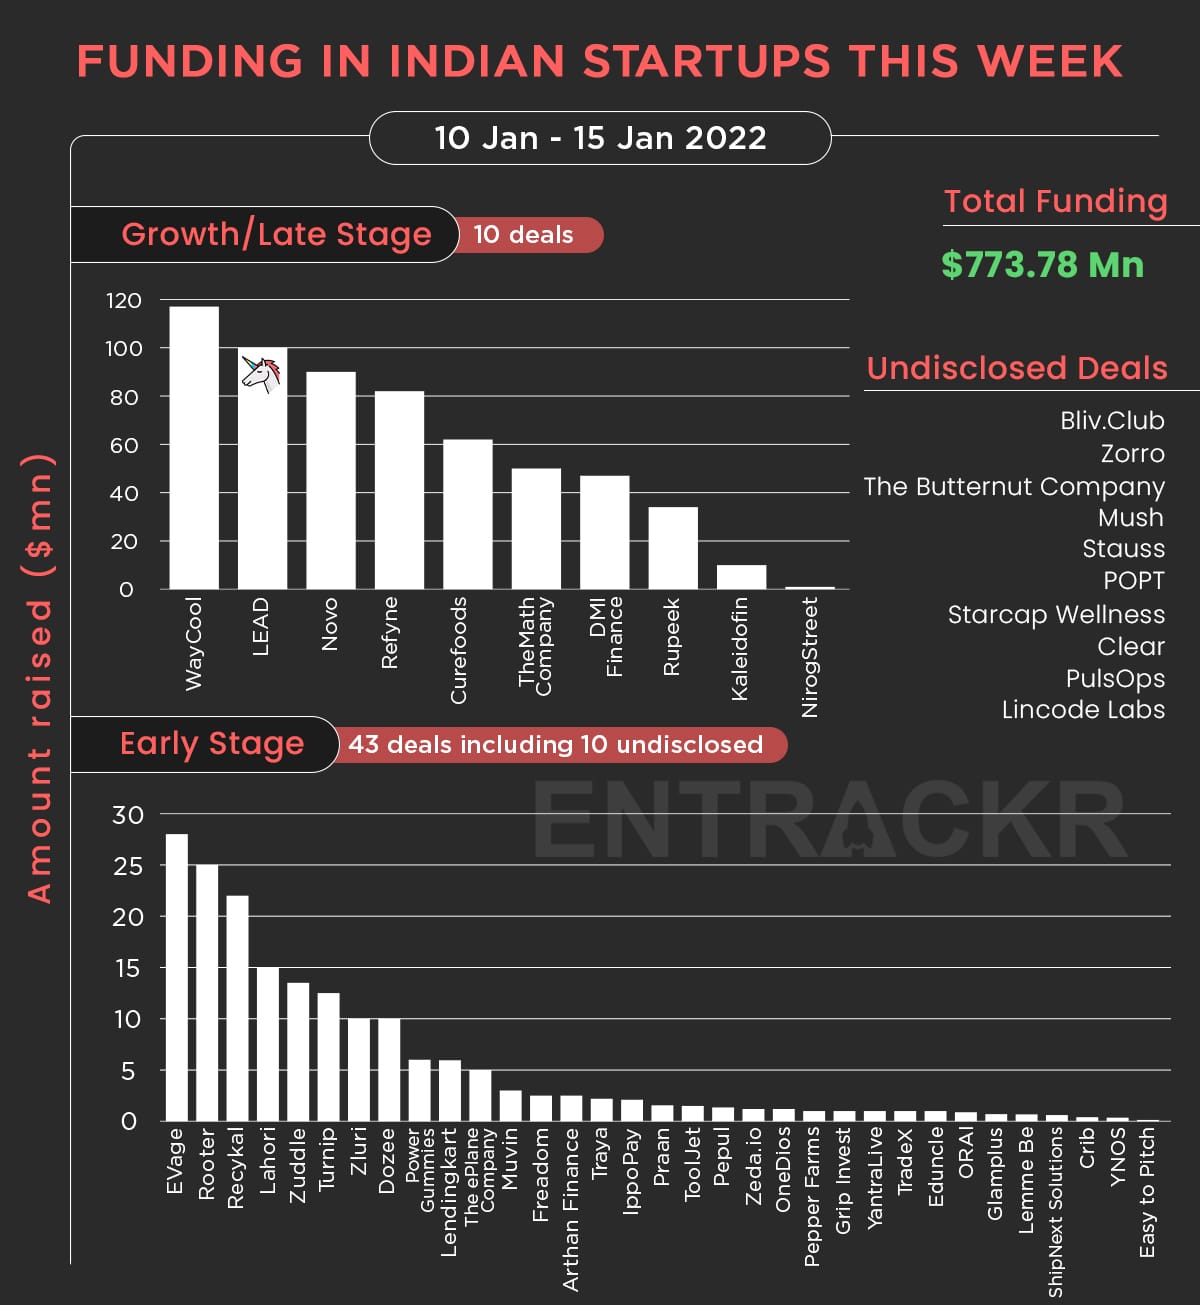 Funding and acquisitions in Indian startups this week [10 Jan - 15